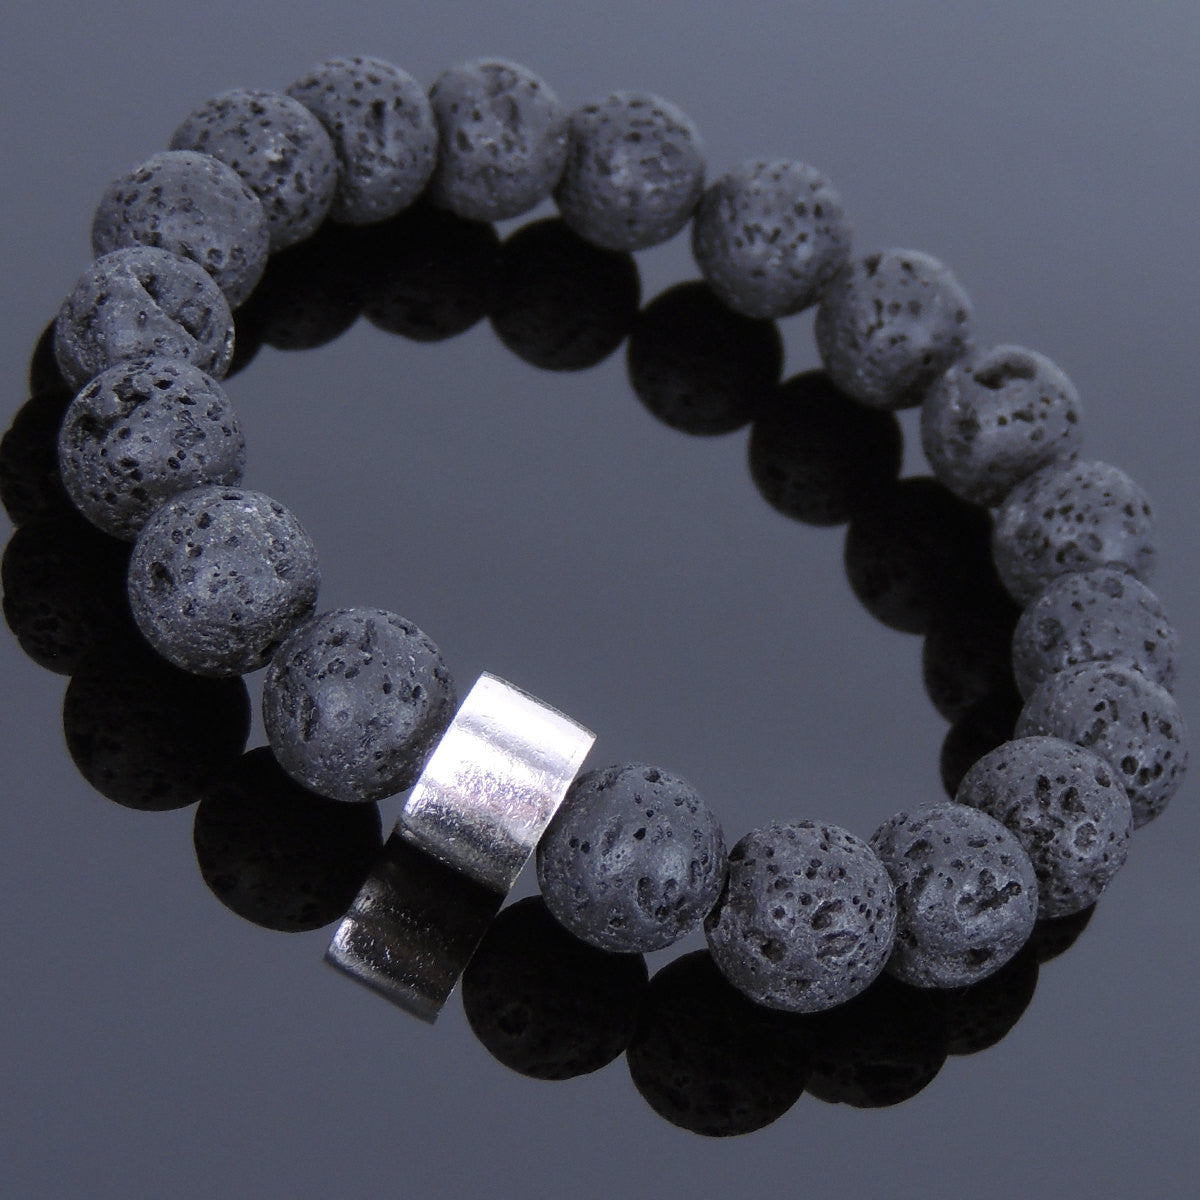 10mm Lava Rock Healing Stone Bracelet with S925 Sterling Silver Simple Wheel Charm - Handmade by Gem & Silver BR709